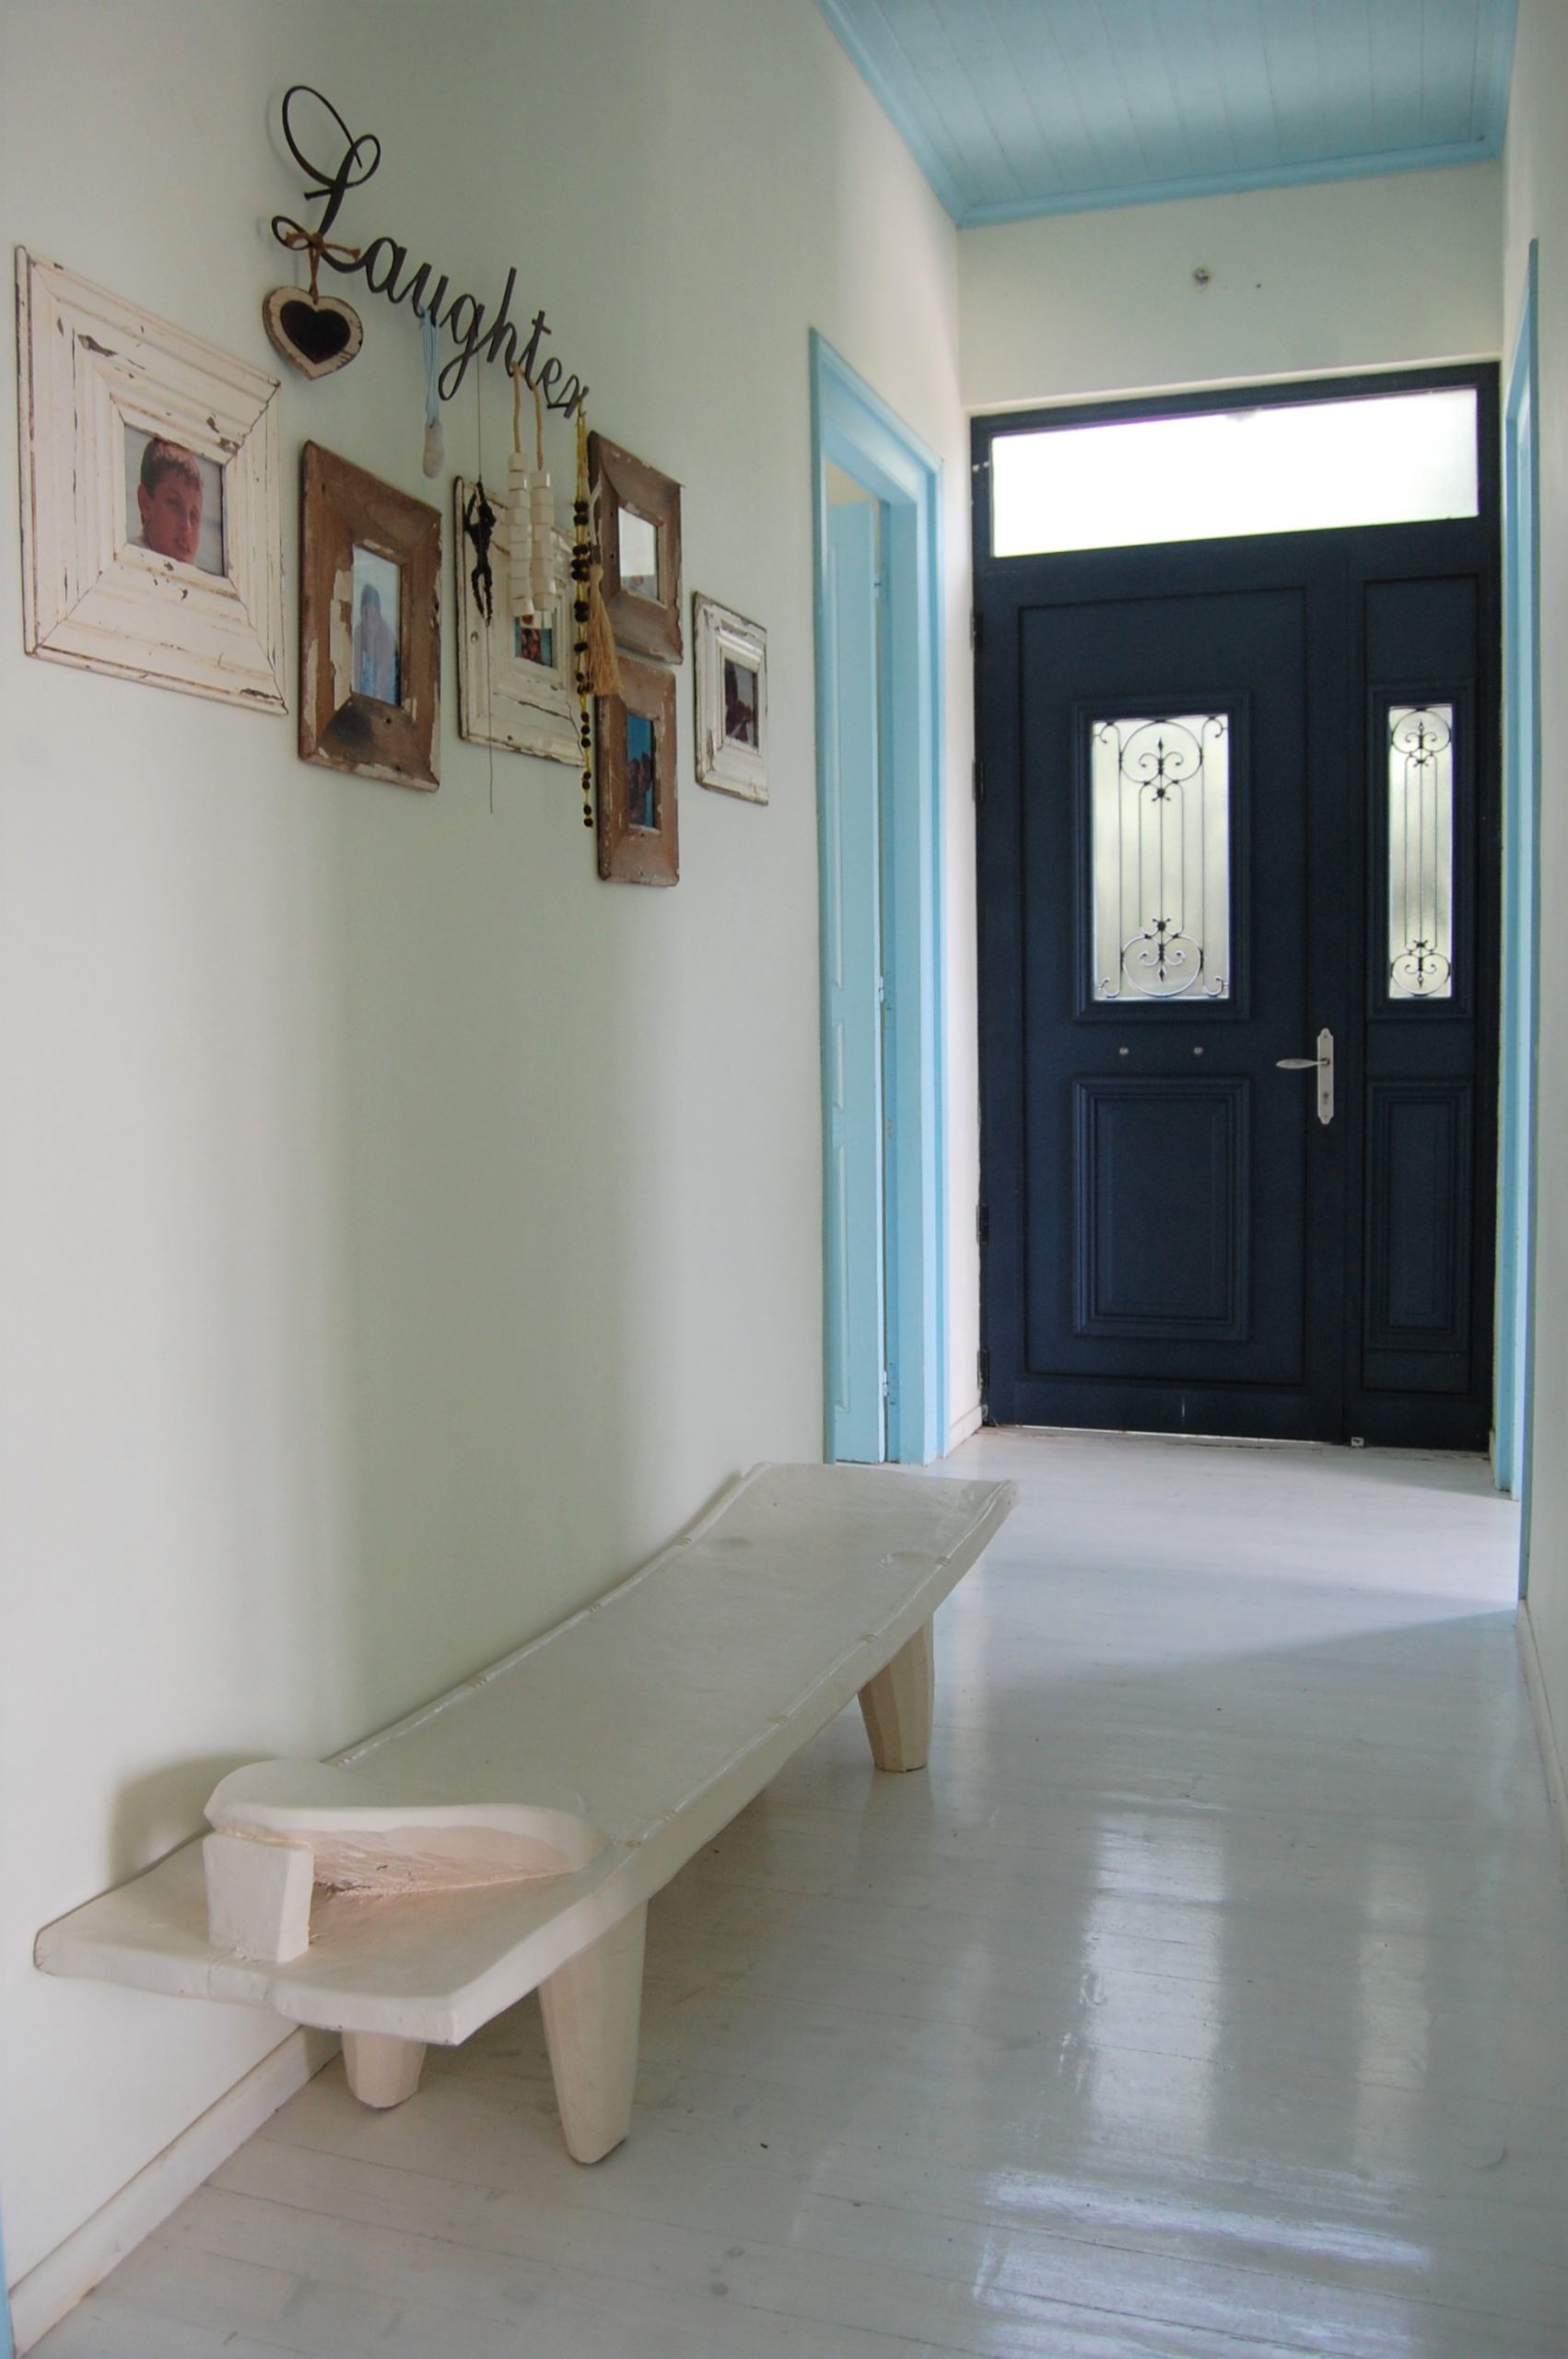 Entrance of holiday house for rent on Ithaca Greece, Kolleri